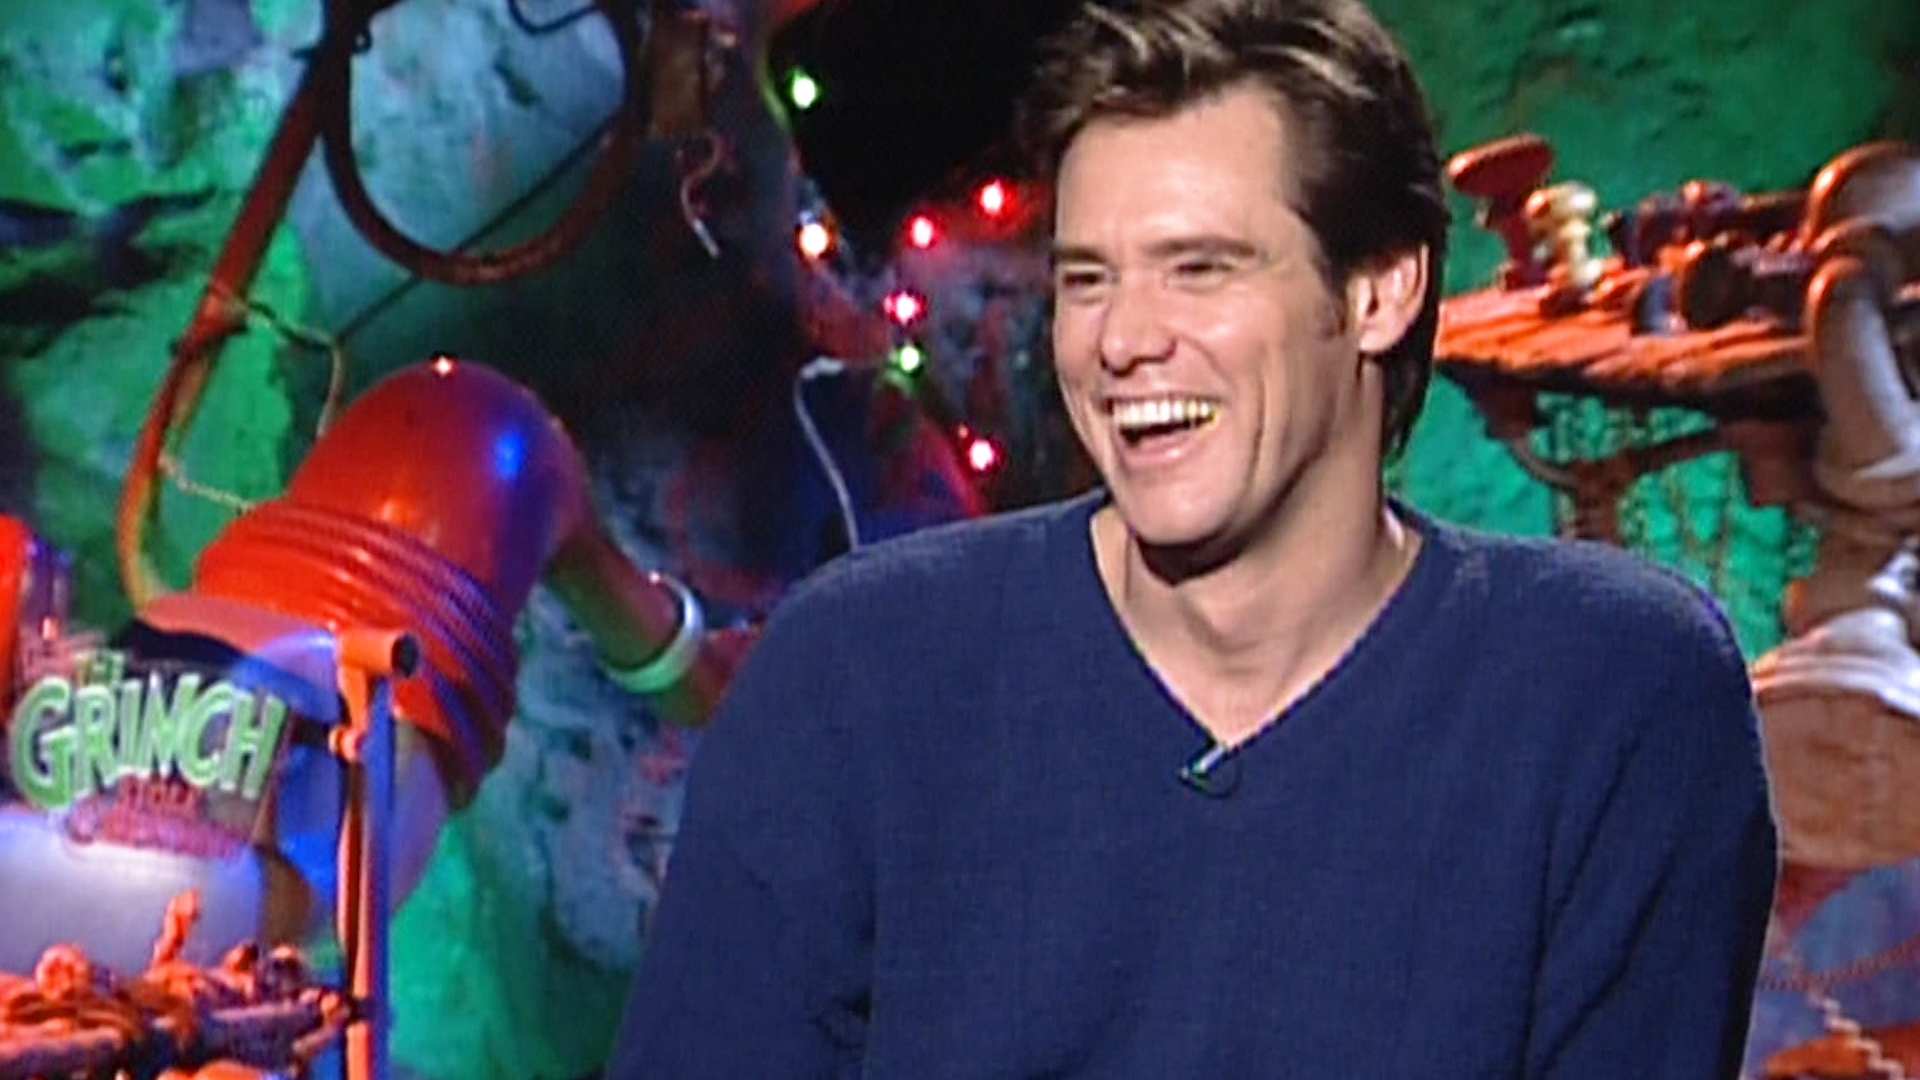 Jim Carrey sat down with WFAA to talk about taking on the role of Grinch in the 2000 film How the Grinch Stole Christmas.